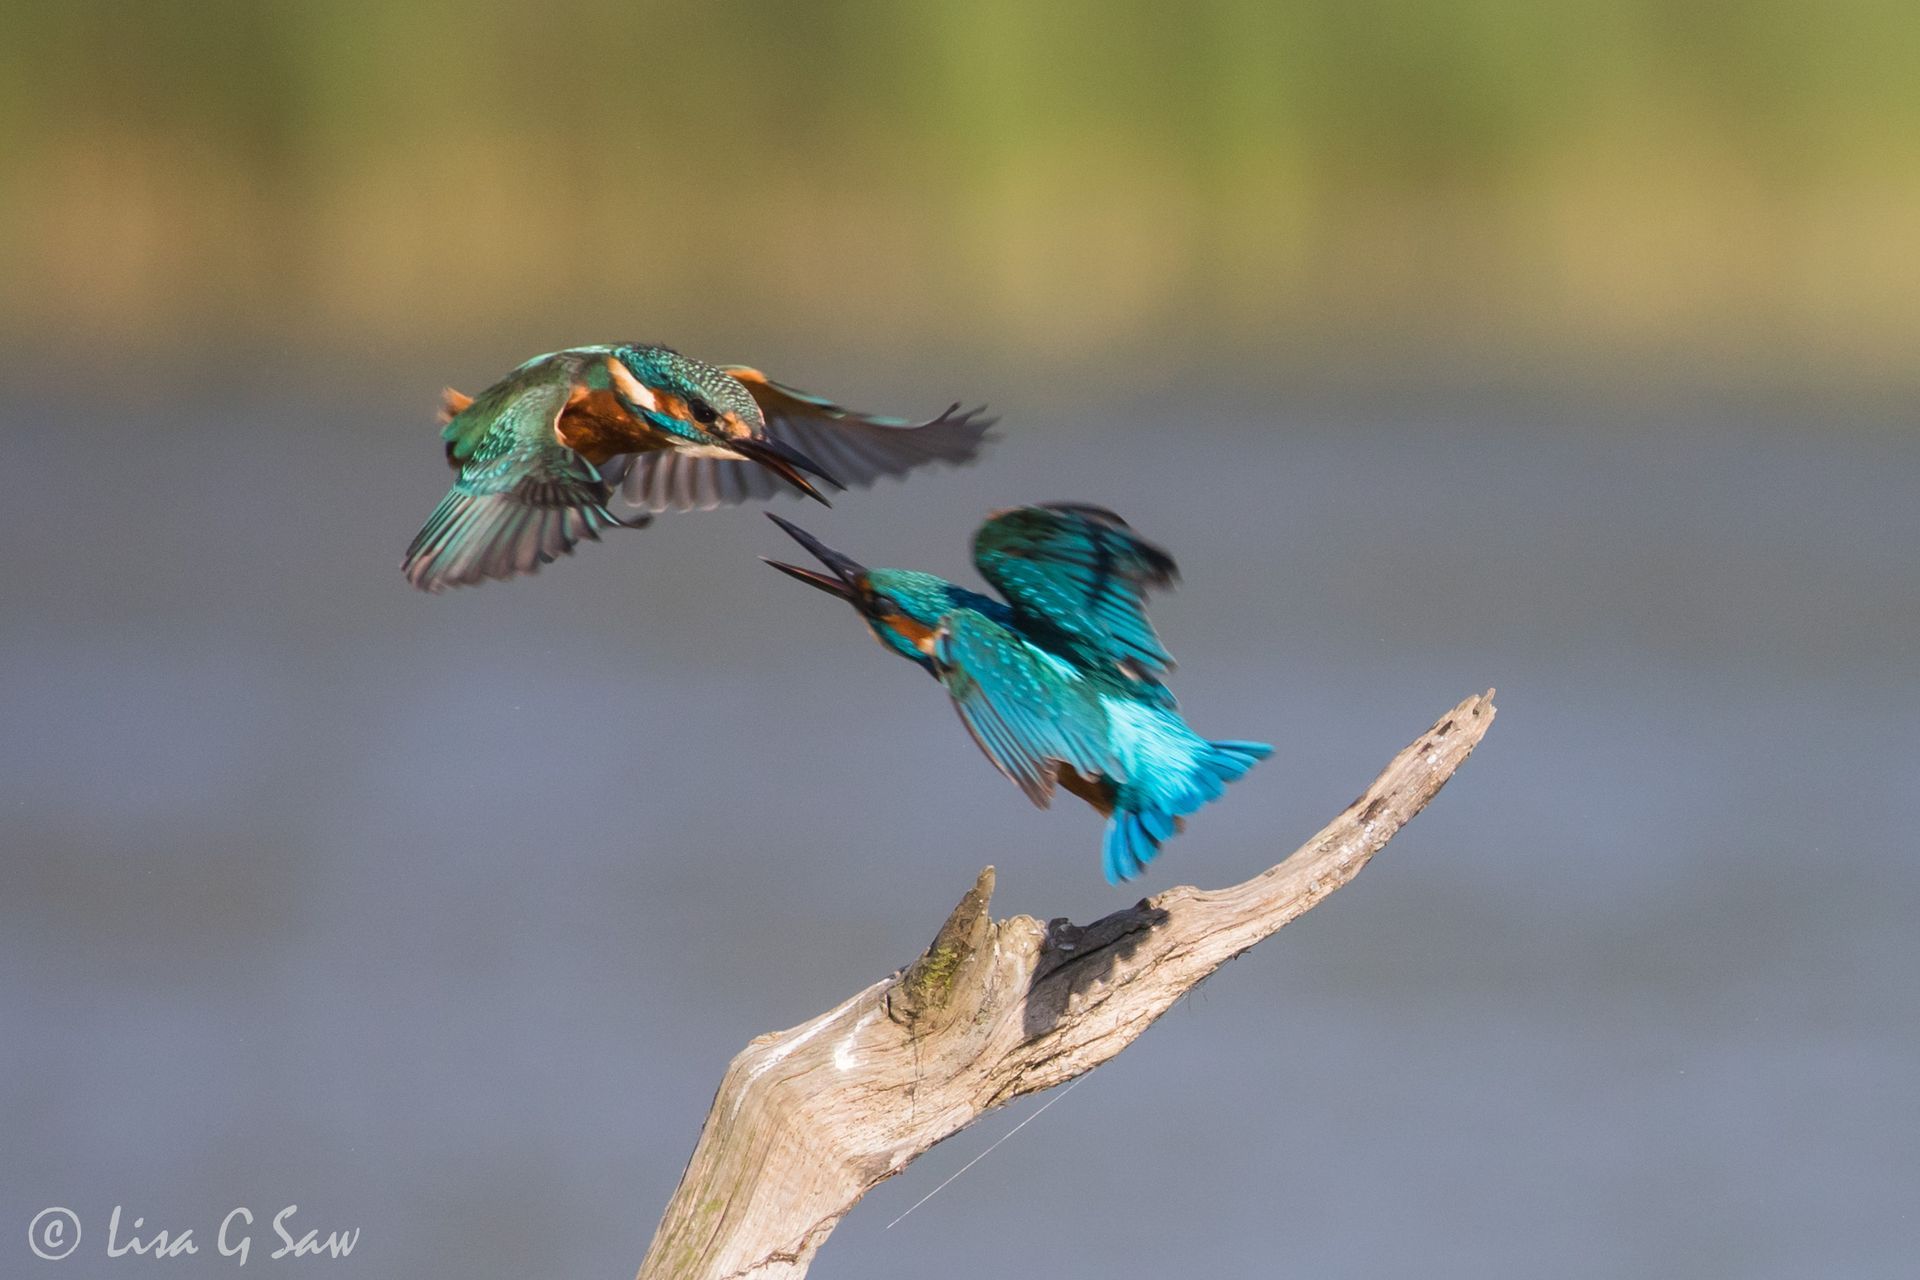 Two male Kingfishers fighting over territory